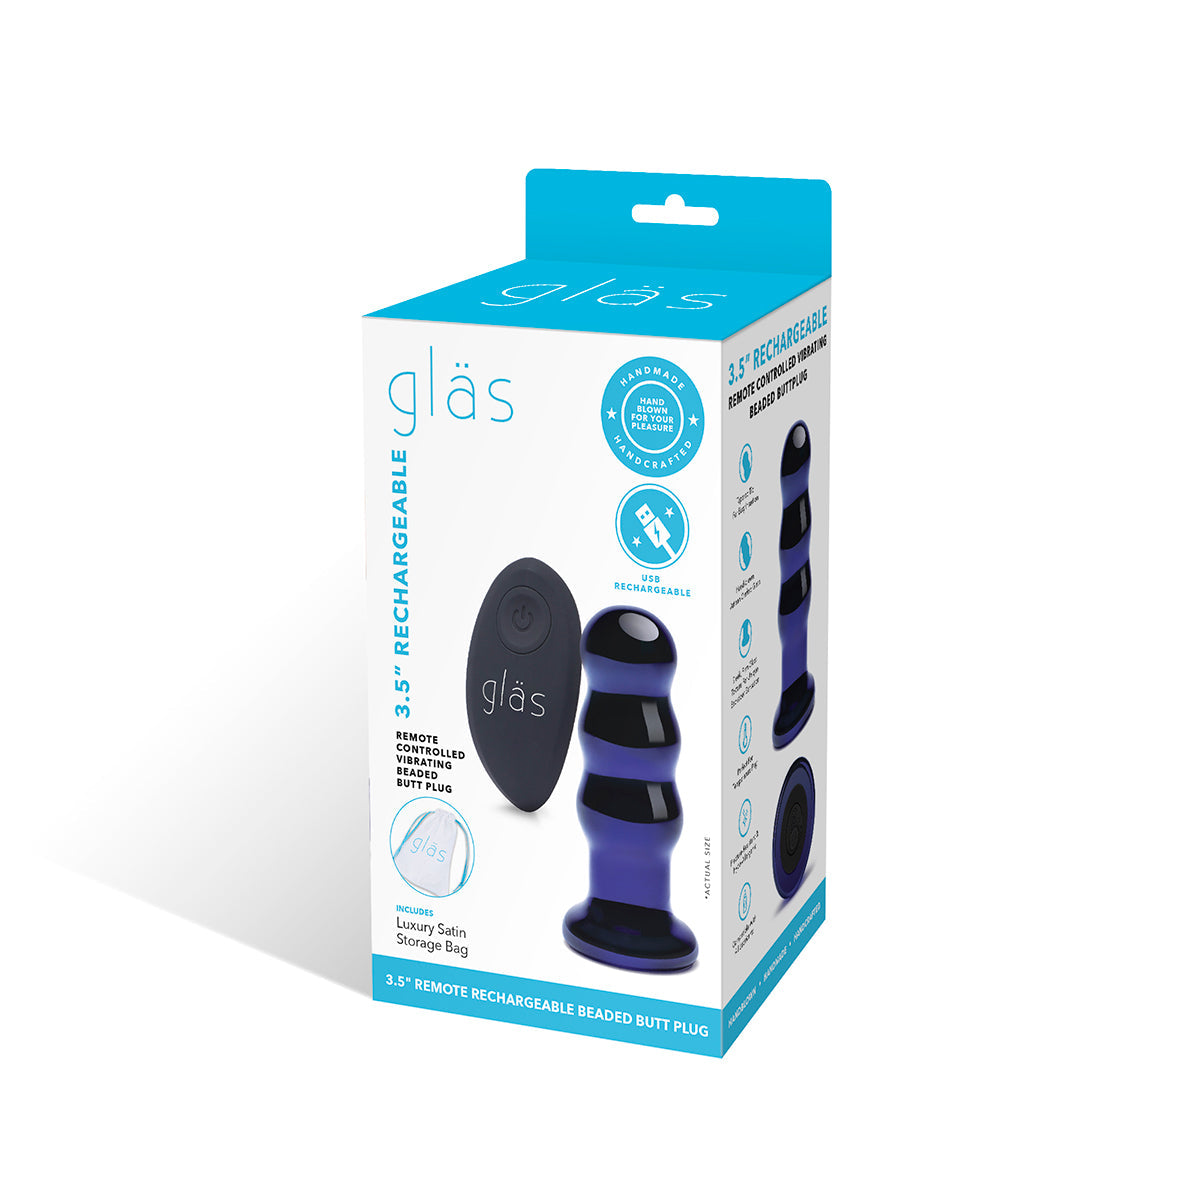 Glas 3.5" Rechargeable Vibrating Beaded Butt Plug - Blue